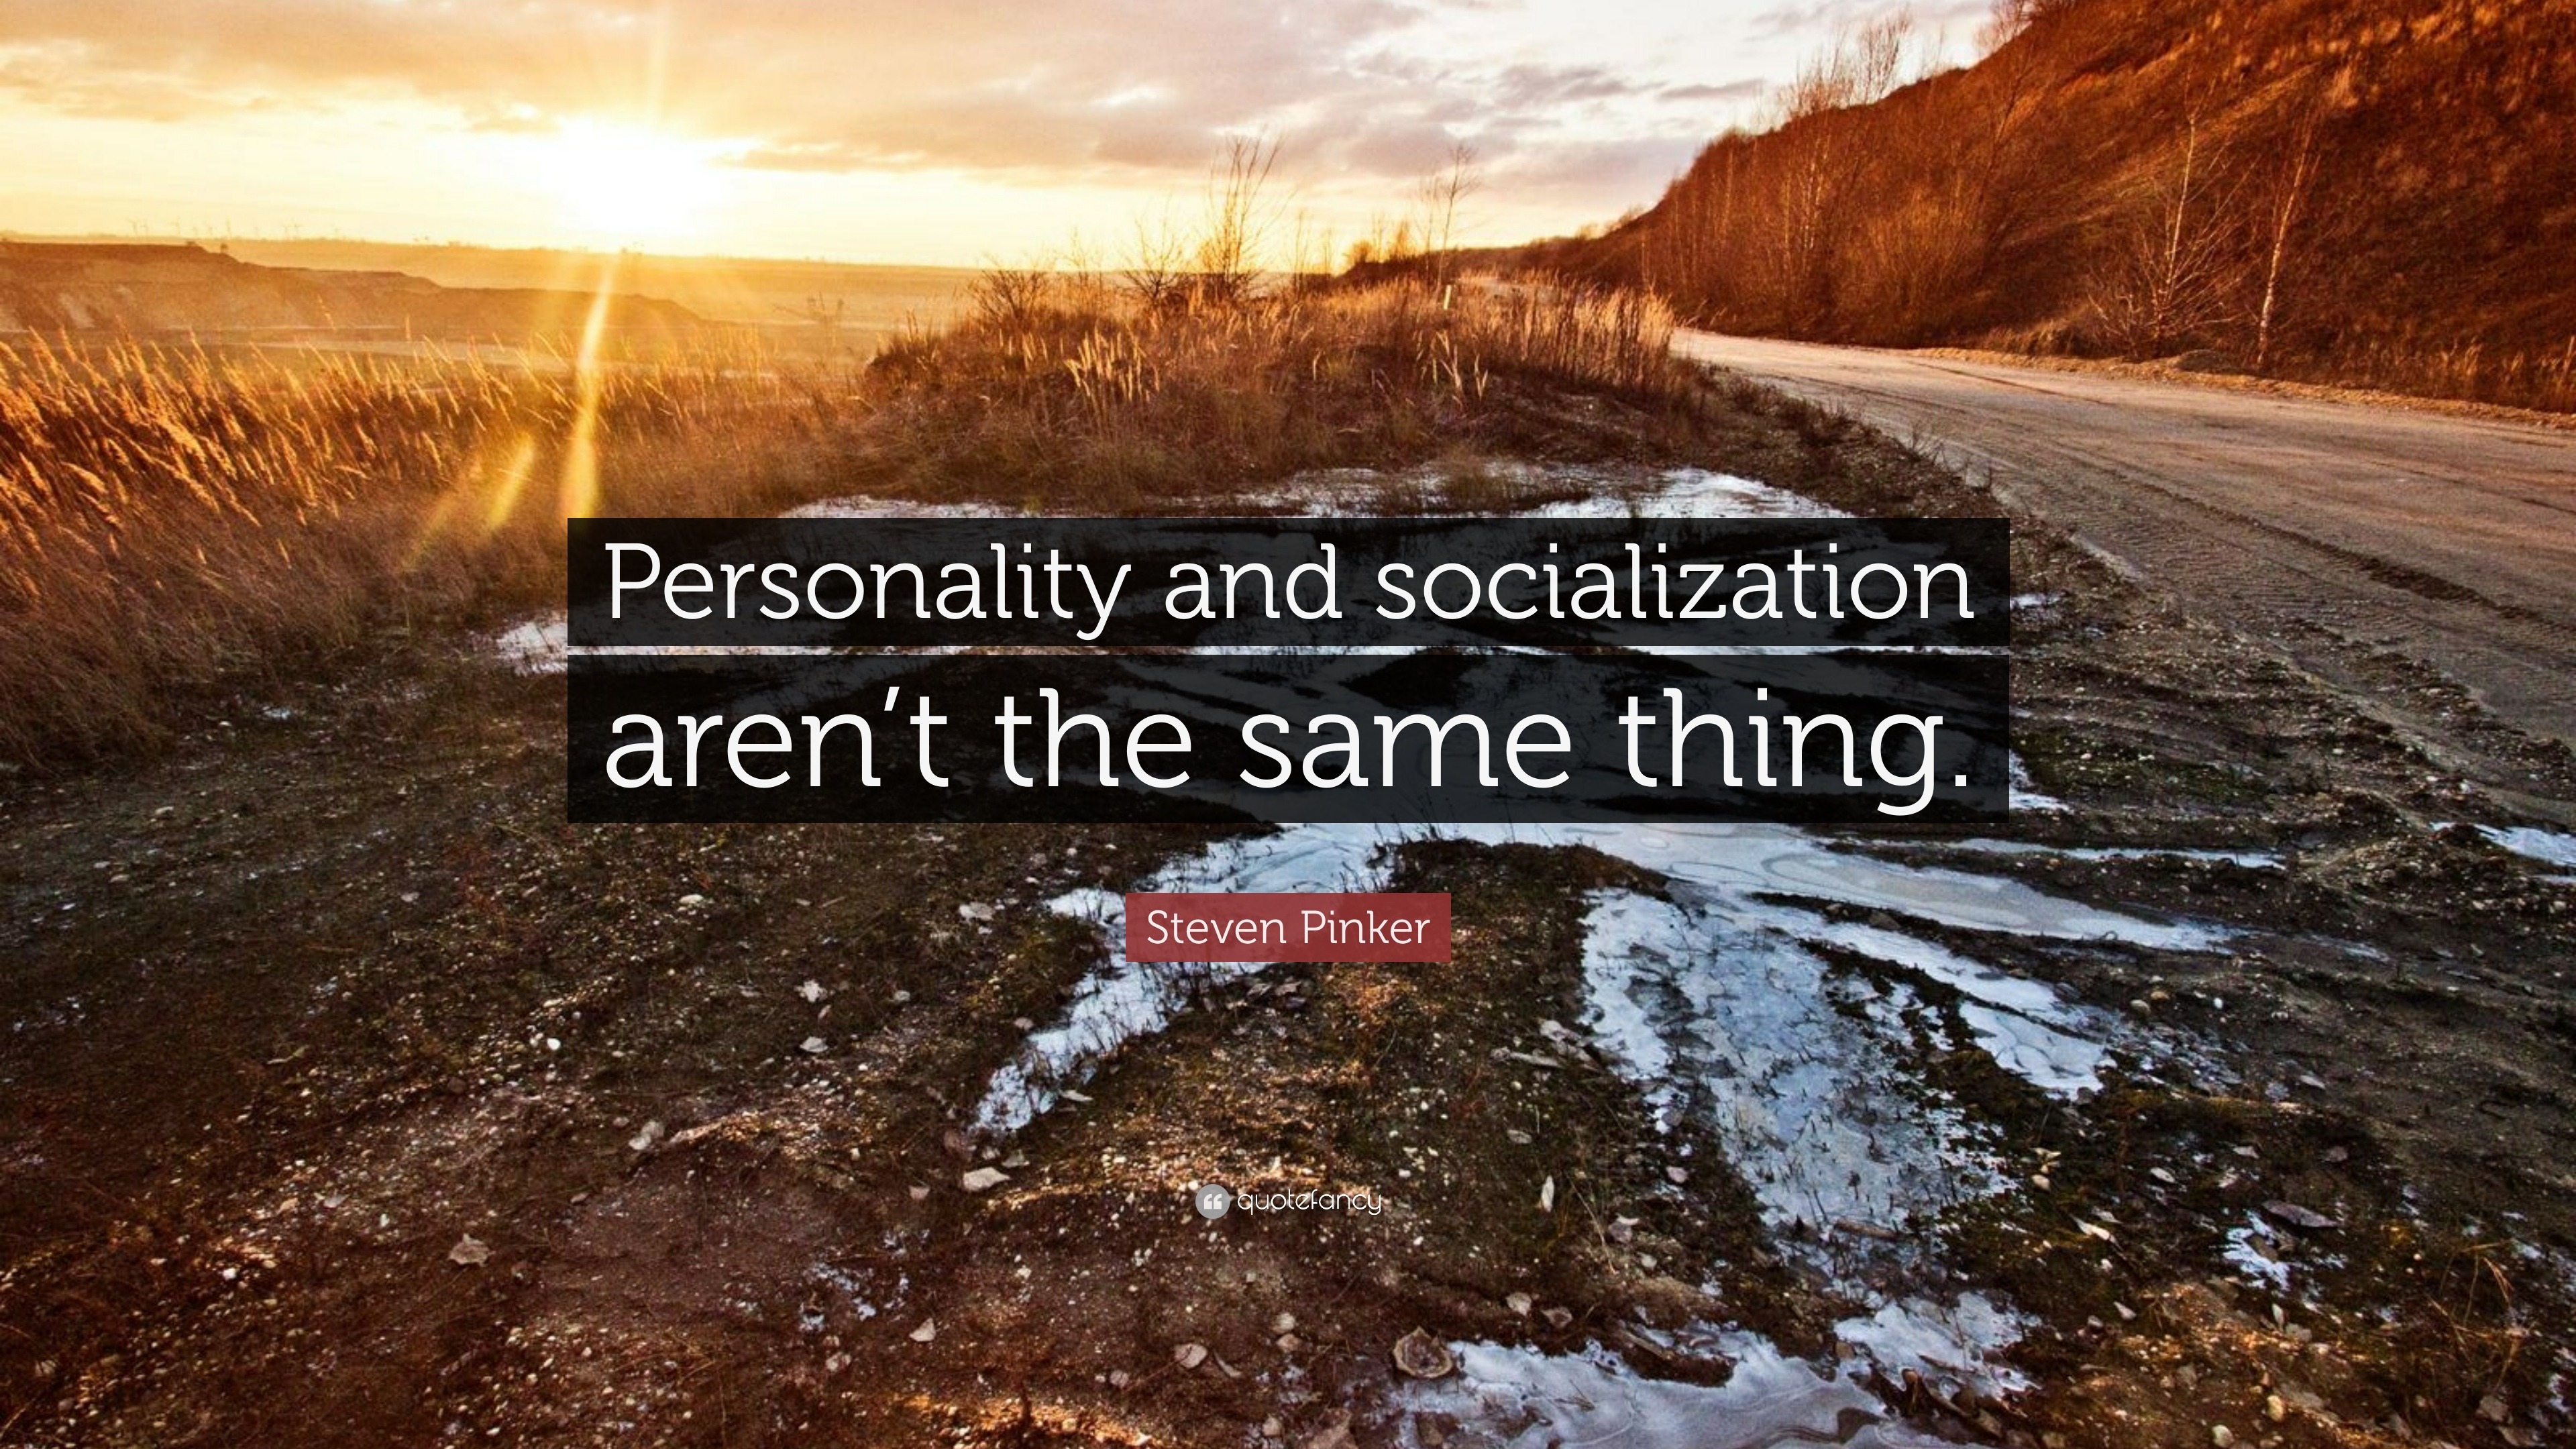 Socialization and personality 